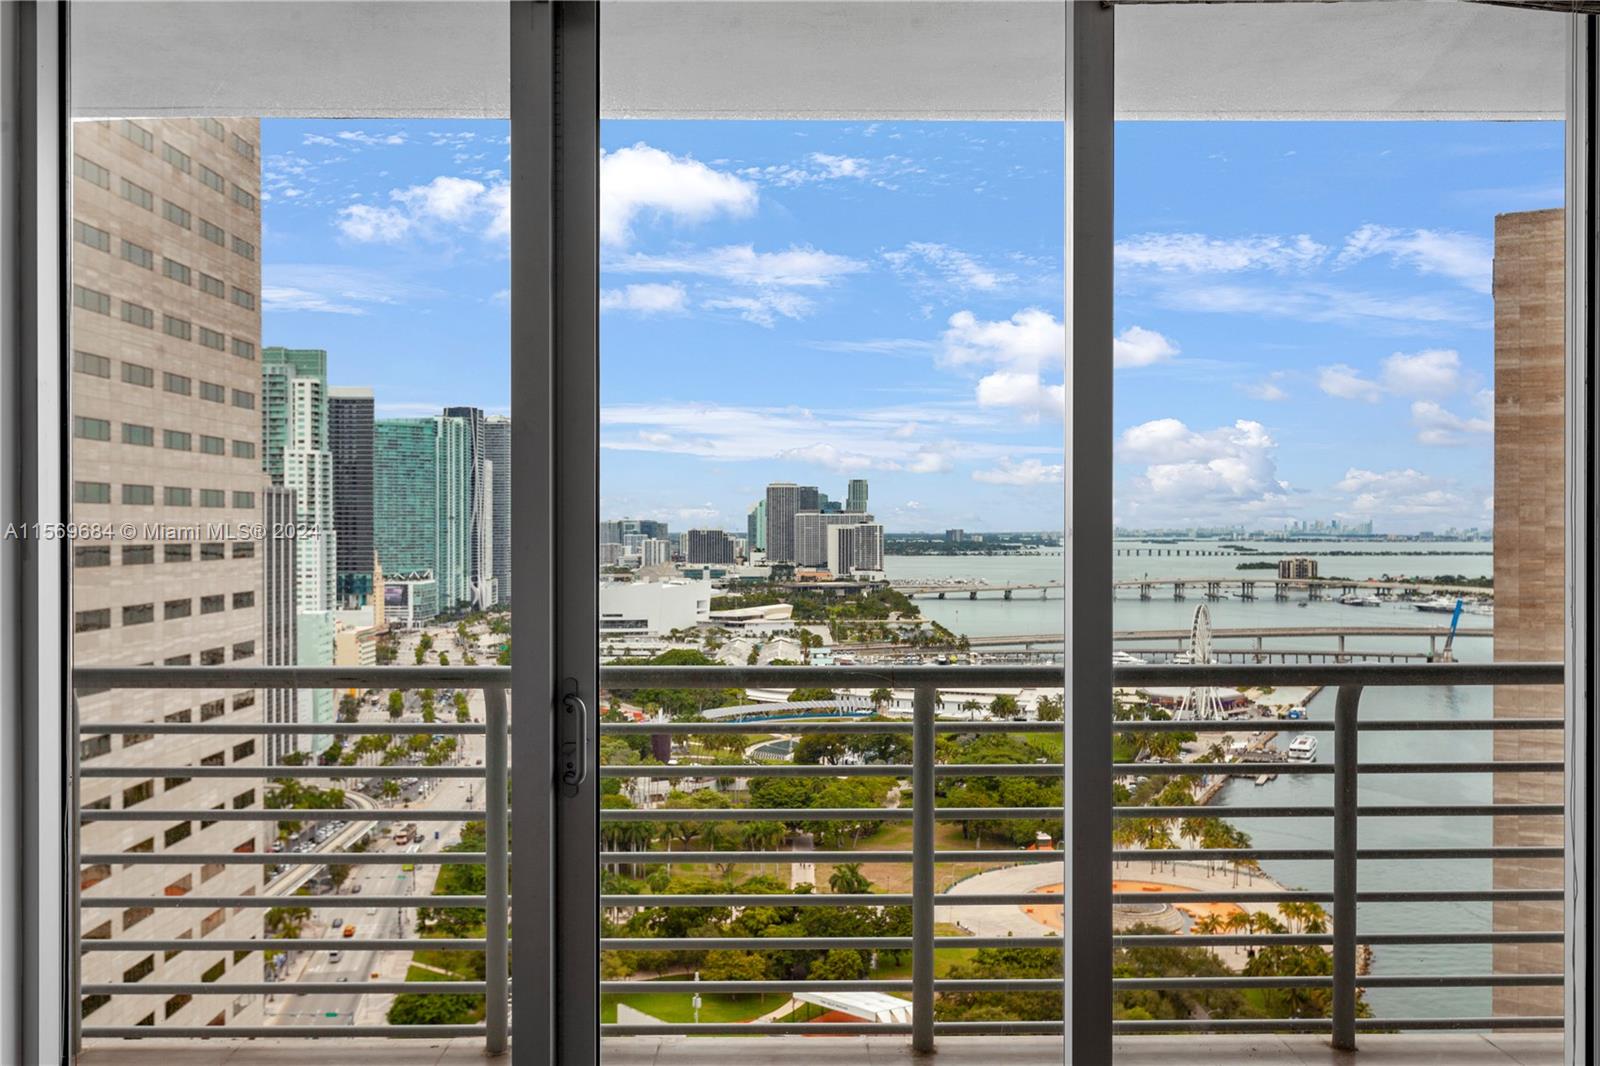 Enjoy waterfront living in this spectacular 32nd-floor apartment, boasting stunning views of the bay, Bayfront Park, and the dazzling city skyline of Miami.
Best 2 bed / 2 full bath line in the building, boasting coveted “split plan” layout w/ beautiful, Brazilian teak wood floors, custom designed corner booth for dining / entertaining.
This building offers luxurious amenities including two pools, jacuzzi, party room, 24 hr valet parking, 24/7 concierge, convenient store. 
Situated in Miami’s most exclusive area, Brickell, Whole Foods & Metromover station just 1 block away, convenient access to the airport and just 15 from the beach. (1) assigned garage parking space - Additional space available for monthly purchase. Don’t miss the opportunity to live in paradise!